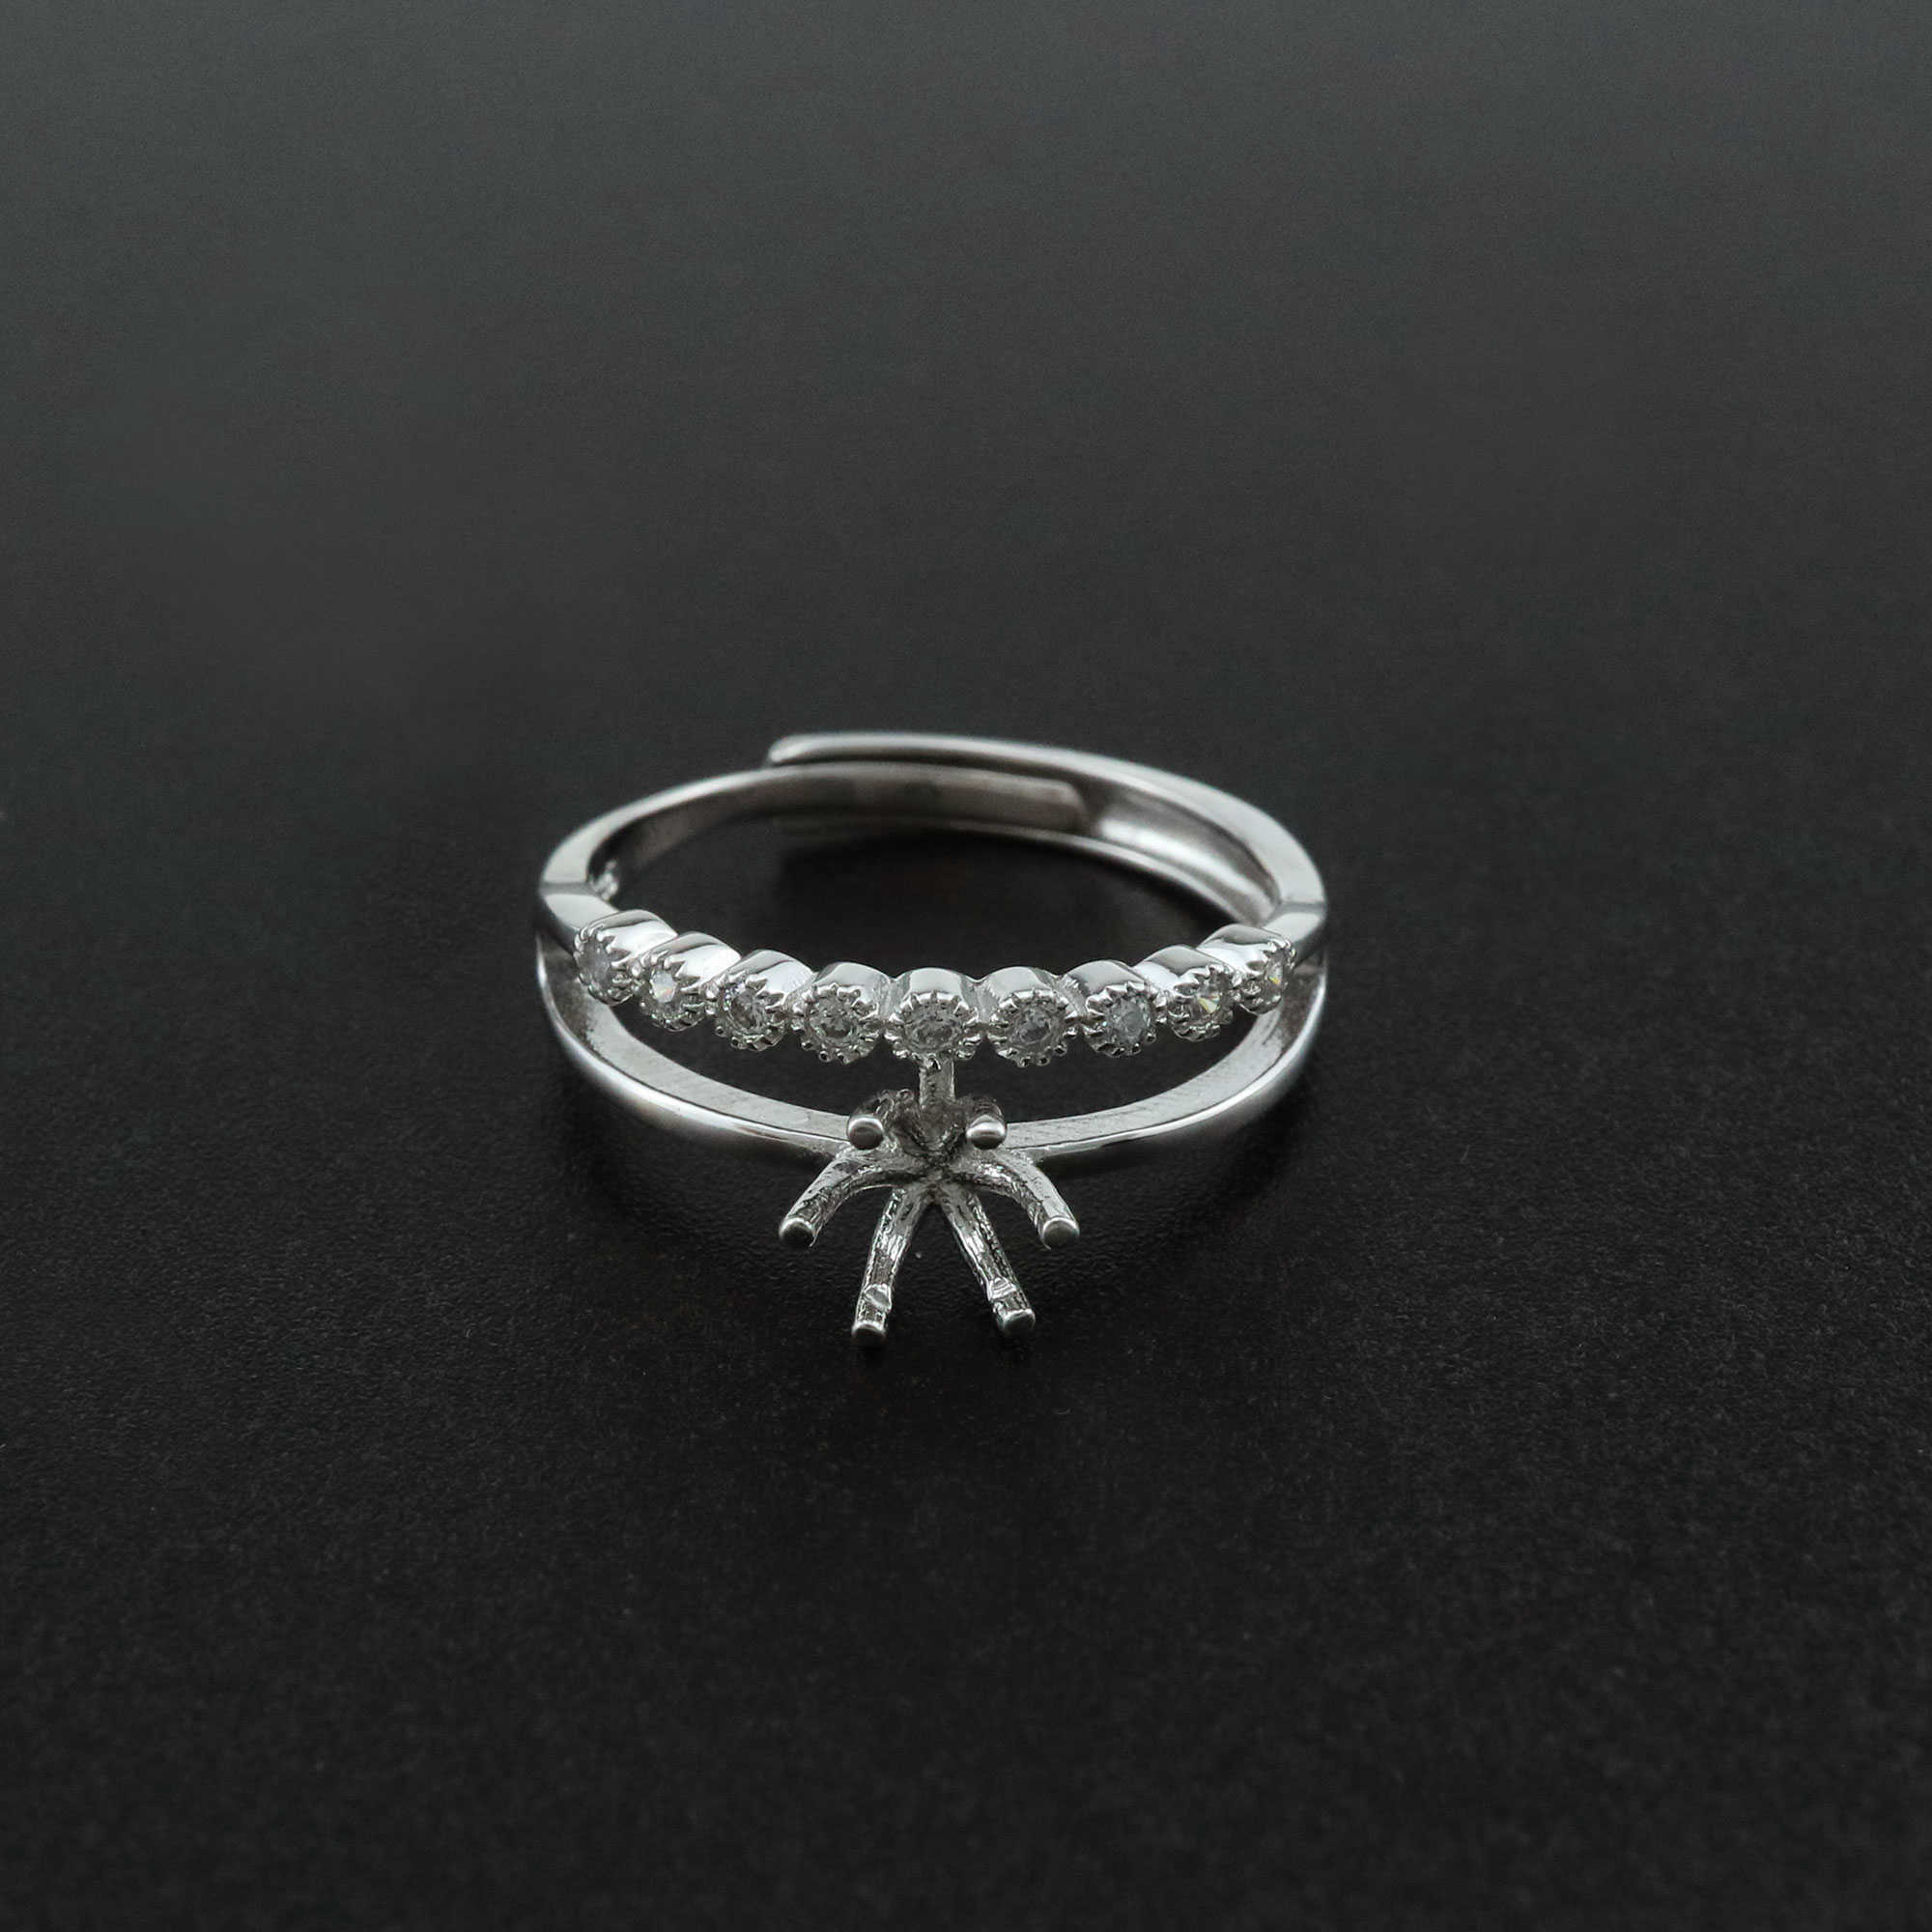 1Pcs 6MM Round Prong Bezel Solid 925 Sterling Silver Adjustable Ring Settings for Moissanite Gemstone DIY Supplies 1212055 - Click Image to Close